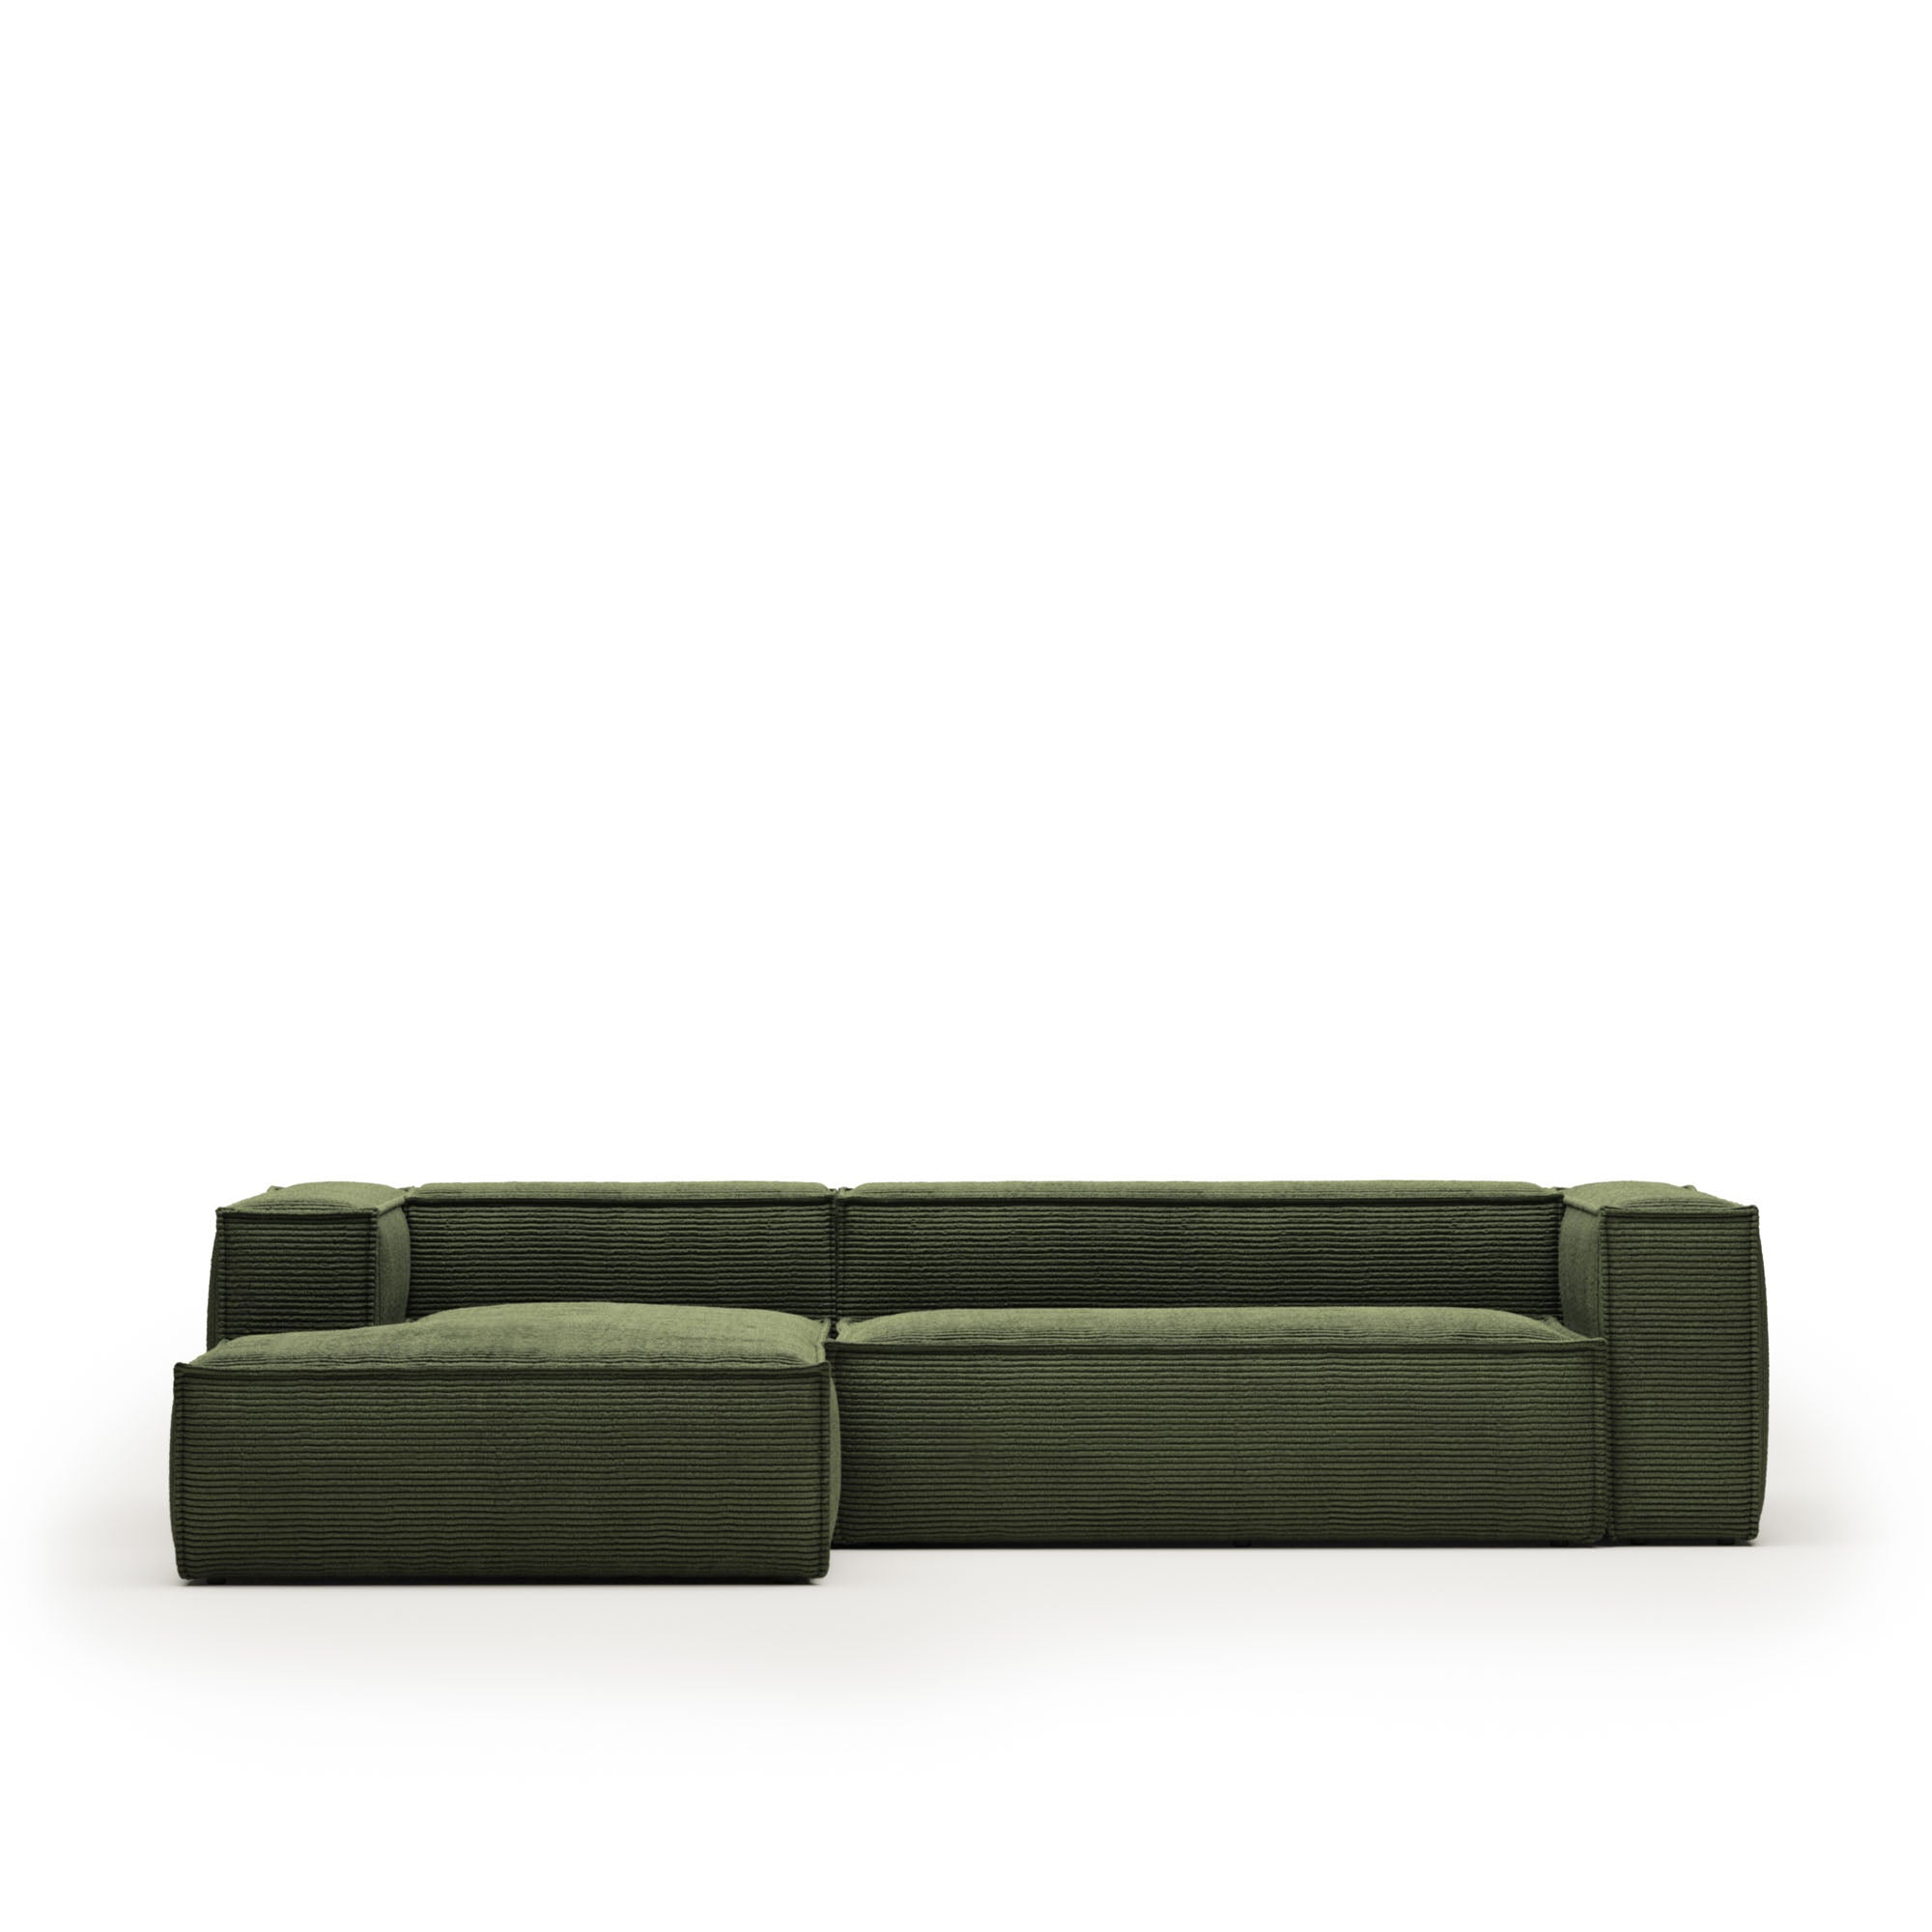 Blok 3-person sofa with chaise longue on the left in green corduroy, 300 cm FR